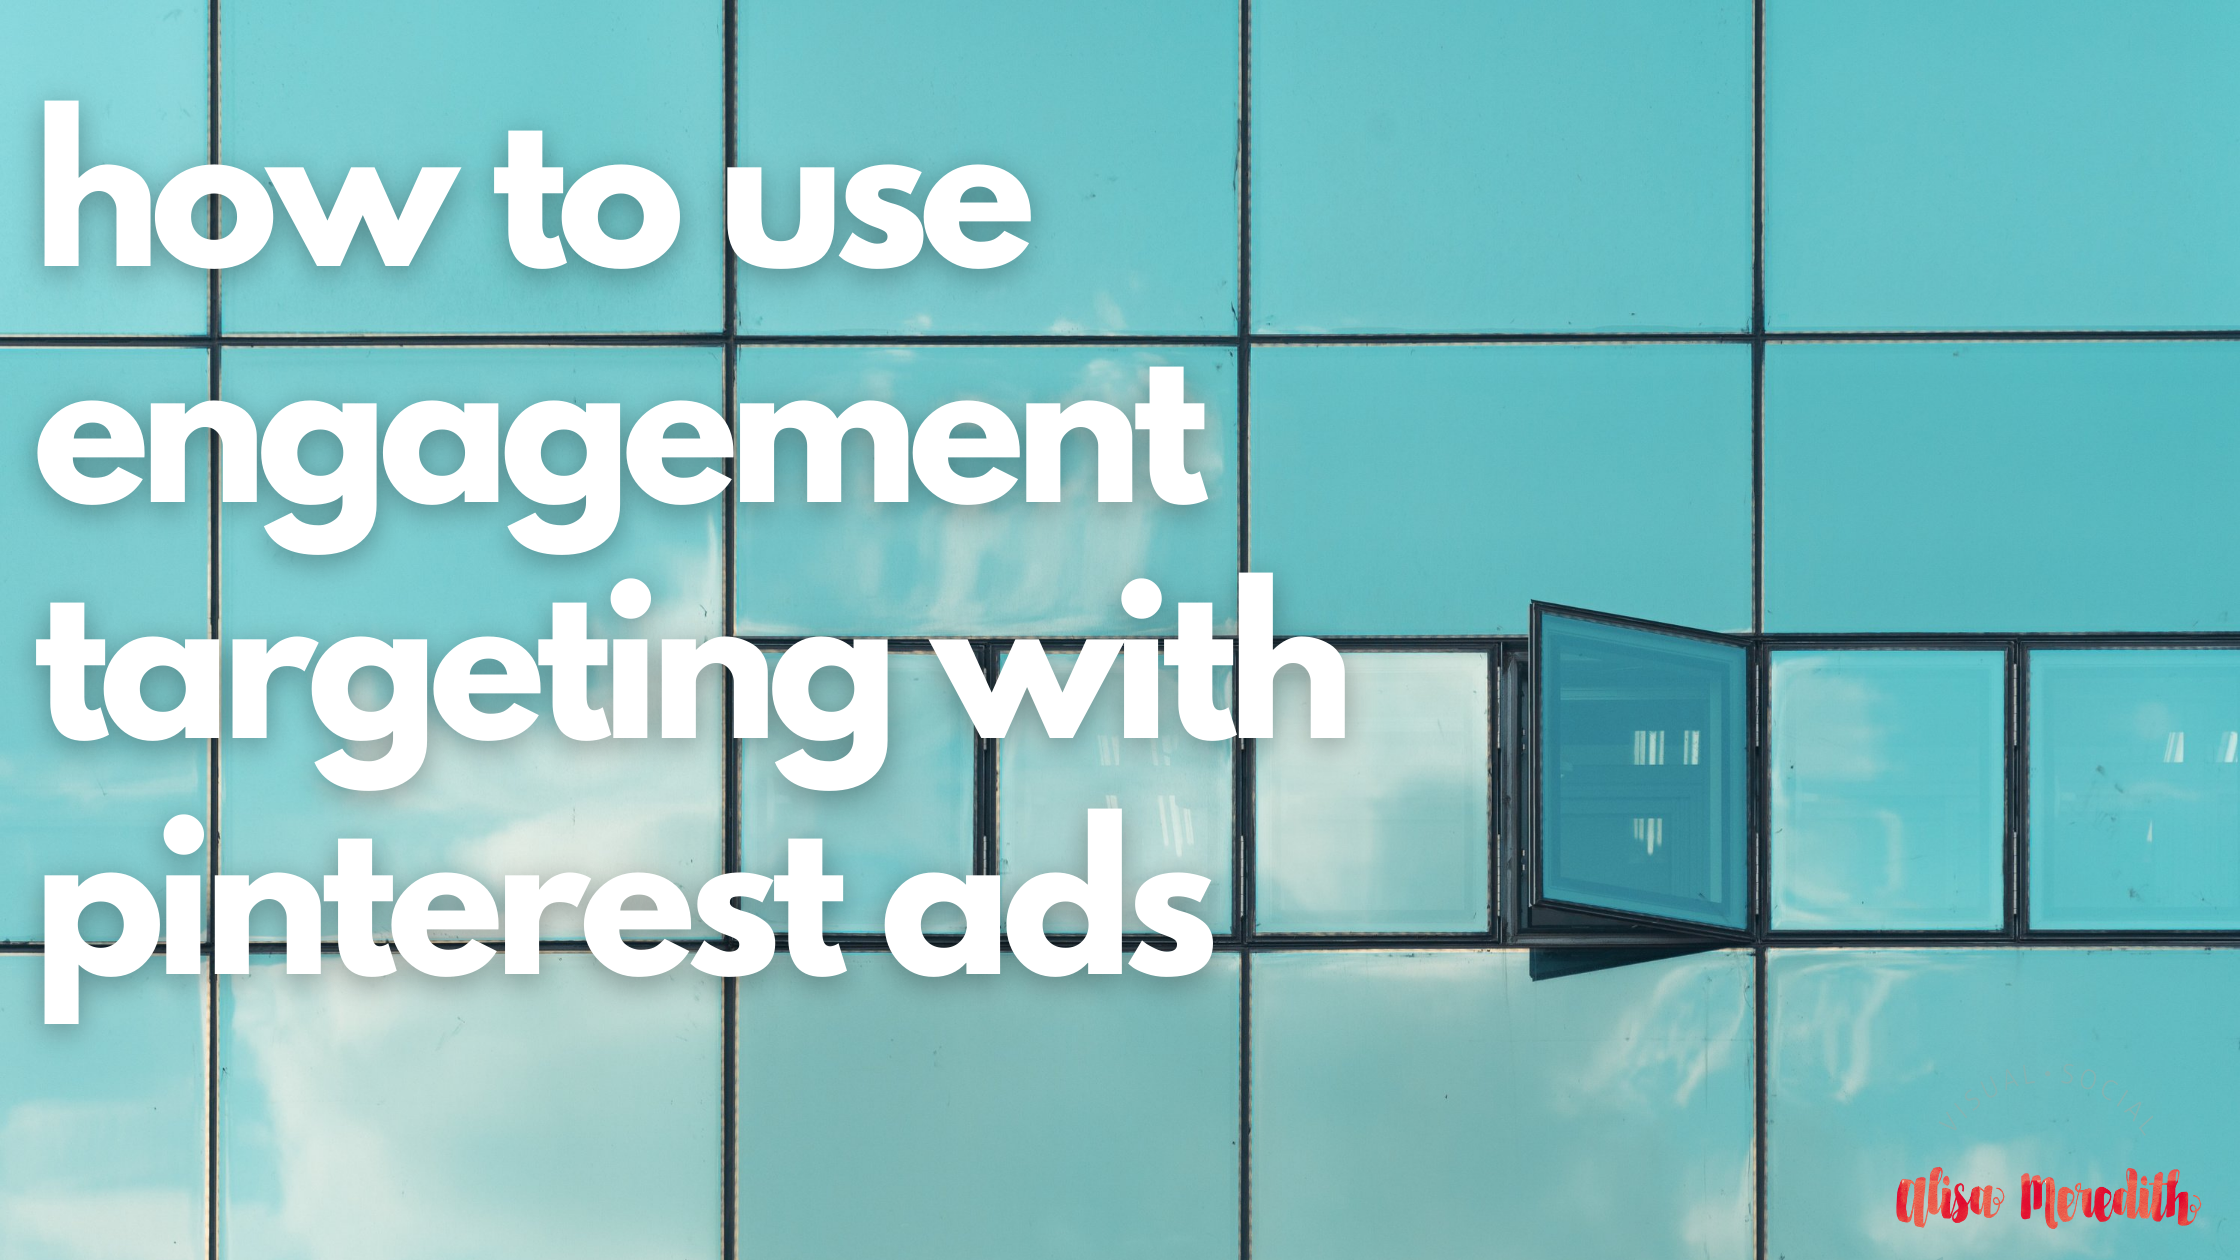 how to use engagement targeting with pinterest ads on a mirrored building facade in a light aqua color